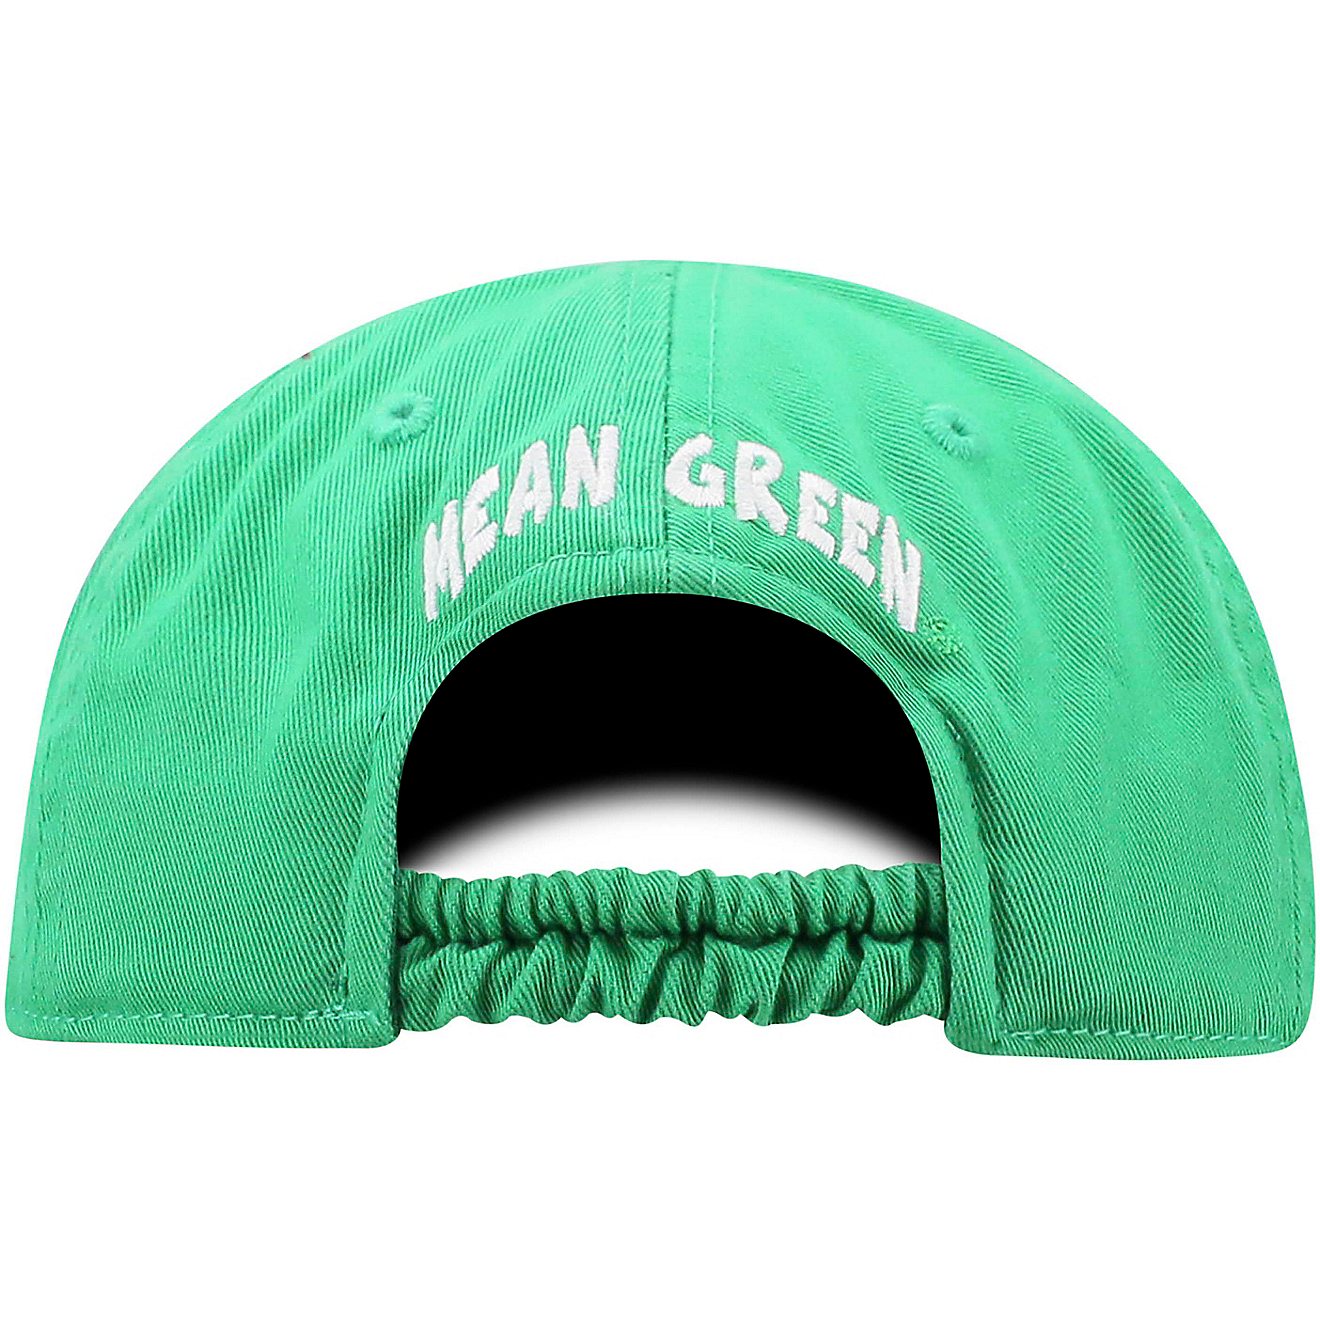 Top of the World Infants' University of North Texas Mini Me Cap                                                                  - view number 3